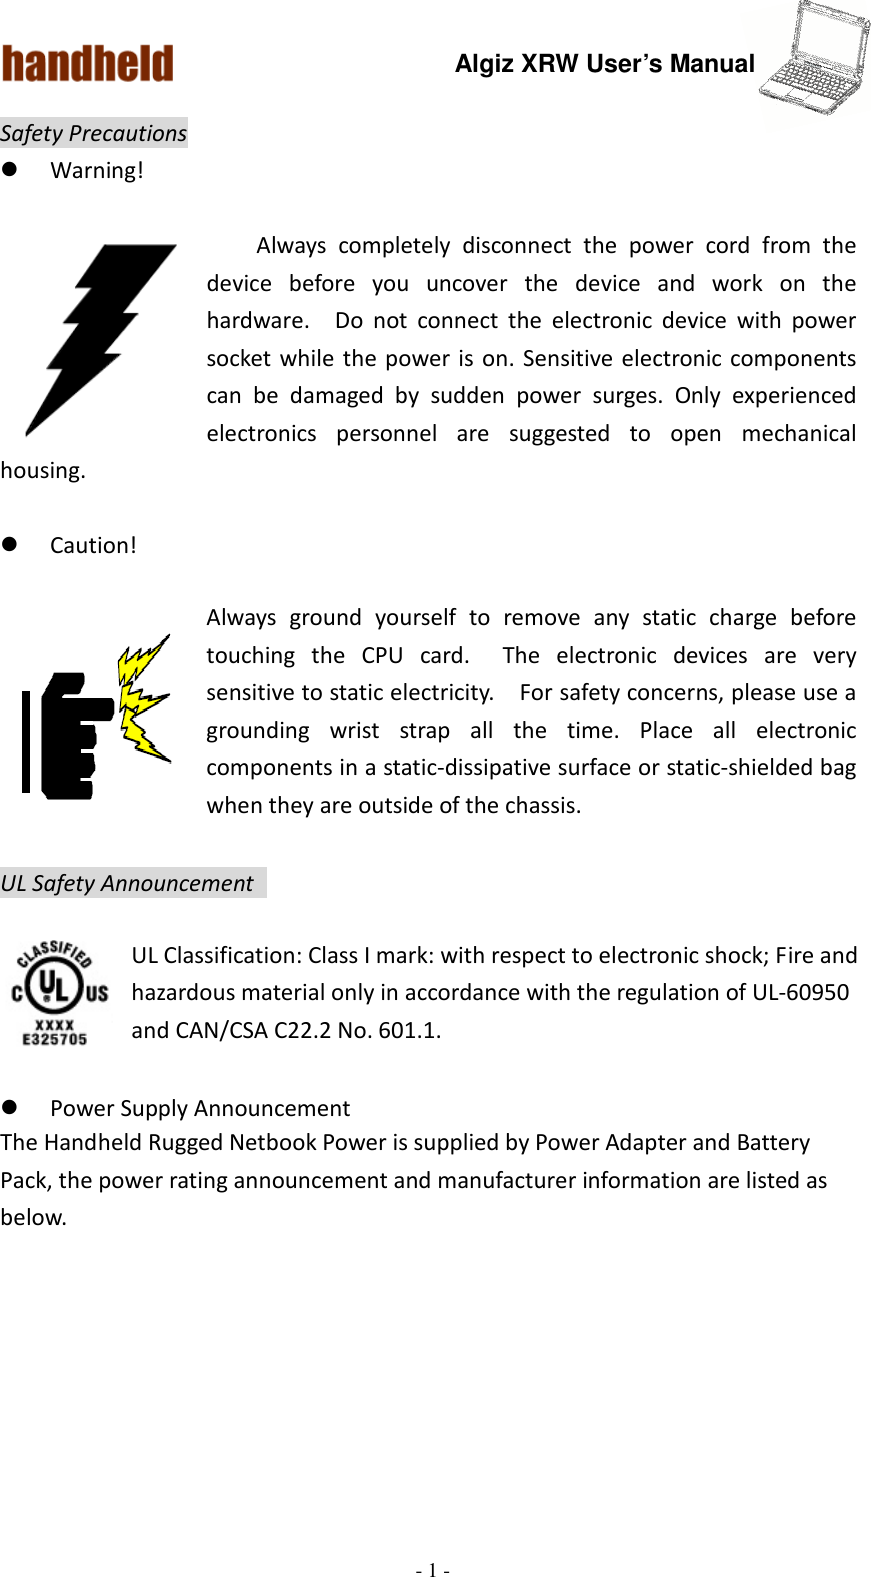 Algiz XRW User’s Manual  - 1 -  Safety Precautions  Warning!  Always  completely  disconnect  the  power  cord  from  the device  before  you  uncover  the  device  and  work  on  the hardware.    Do  not  connect  the  electronic  device  with  power socket while the power is  on.  Sensitive electronic components can  be  damaged  by  sudden  power  surges.  Only  experienced electronics  personnel  are  suggested  to  open  mechanical housing.   Caution!  Always  ground  yourself  to  remove  any  static  charge  before touching  the  CPU  card.    The  electronic  devices  are  very sensitive to static electricity.    For safety concerns, please use a grounding  wrist  strap  all  the  time.  Place  all  electronic components in a static-dissipative surface or static-shielded bag when they are outside of the chassis.  UL Safety Announcement    UL Classification: Class I mark: with respect to electronic shock; Fire and hazardous material only in accordance with the regulation of UL-60950 and CAN/CSA C22.2 No. 601.1.   Power Supply Announcement The Handheld Rugged Netbook Power is supplied by Power Adapter and Battery Pack, the power rating announcement and manufacturer information are listed as below.   